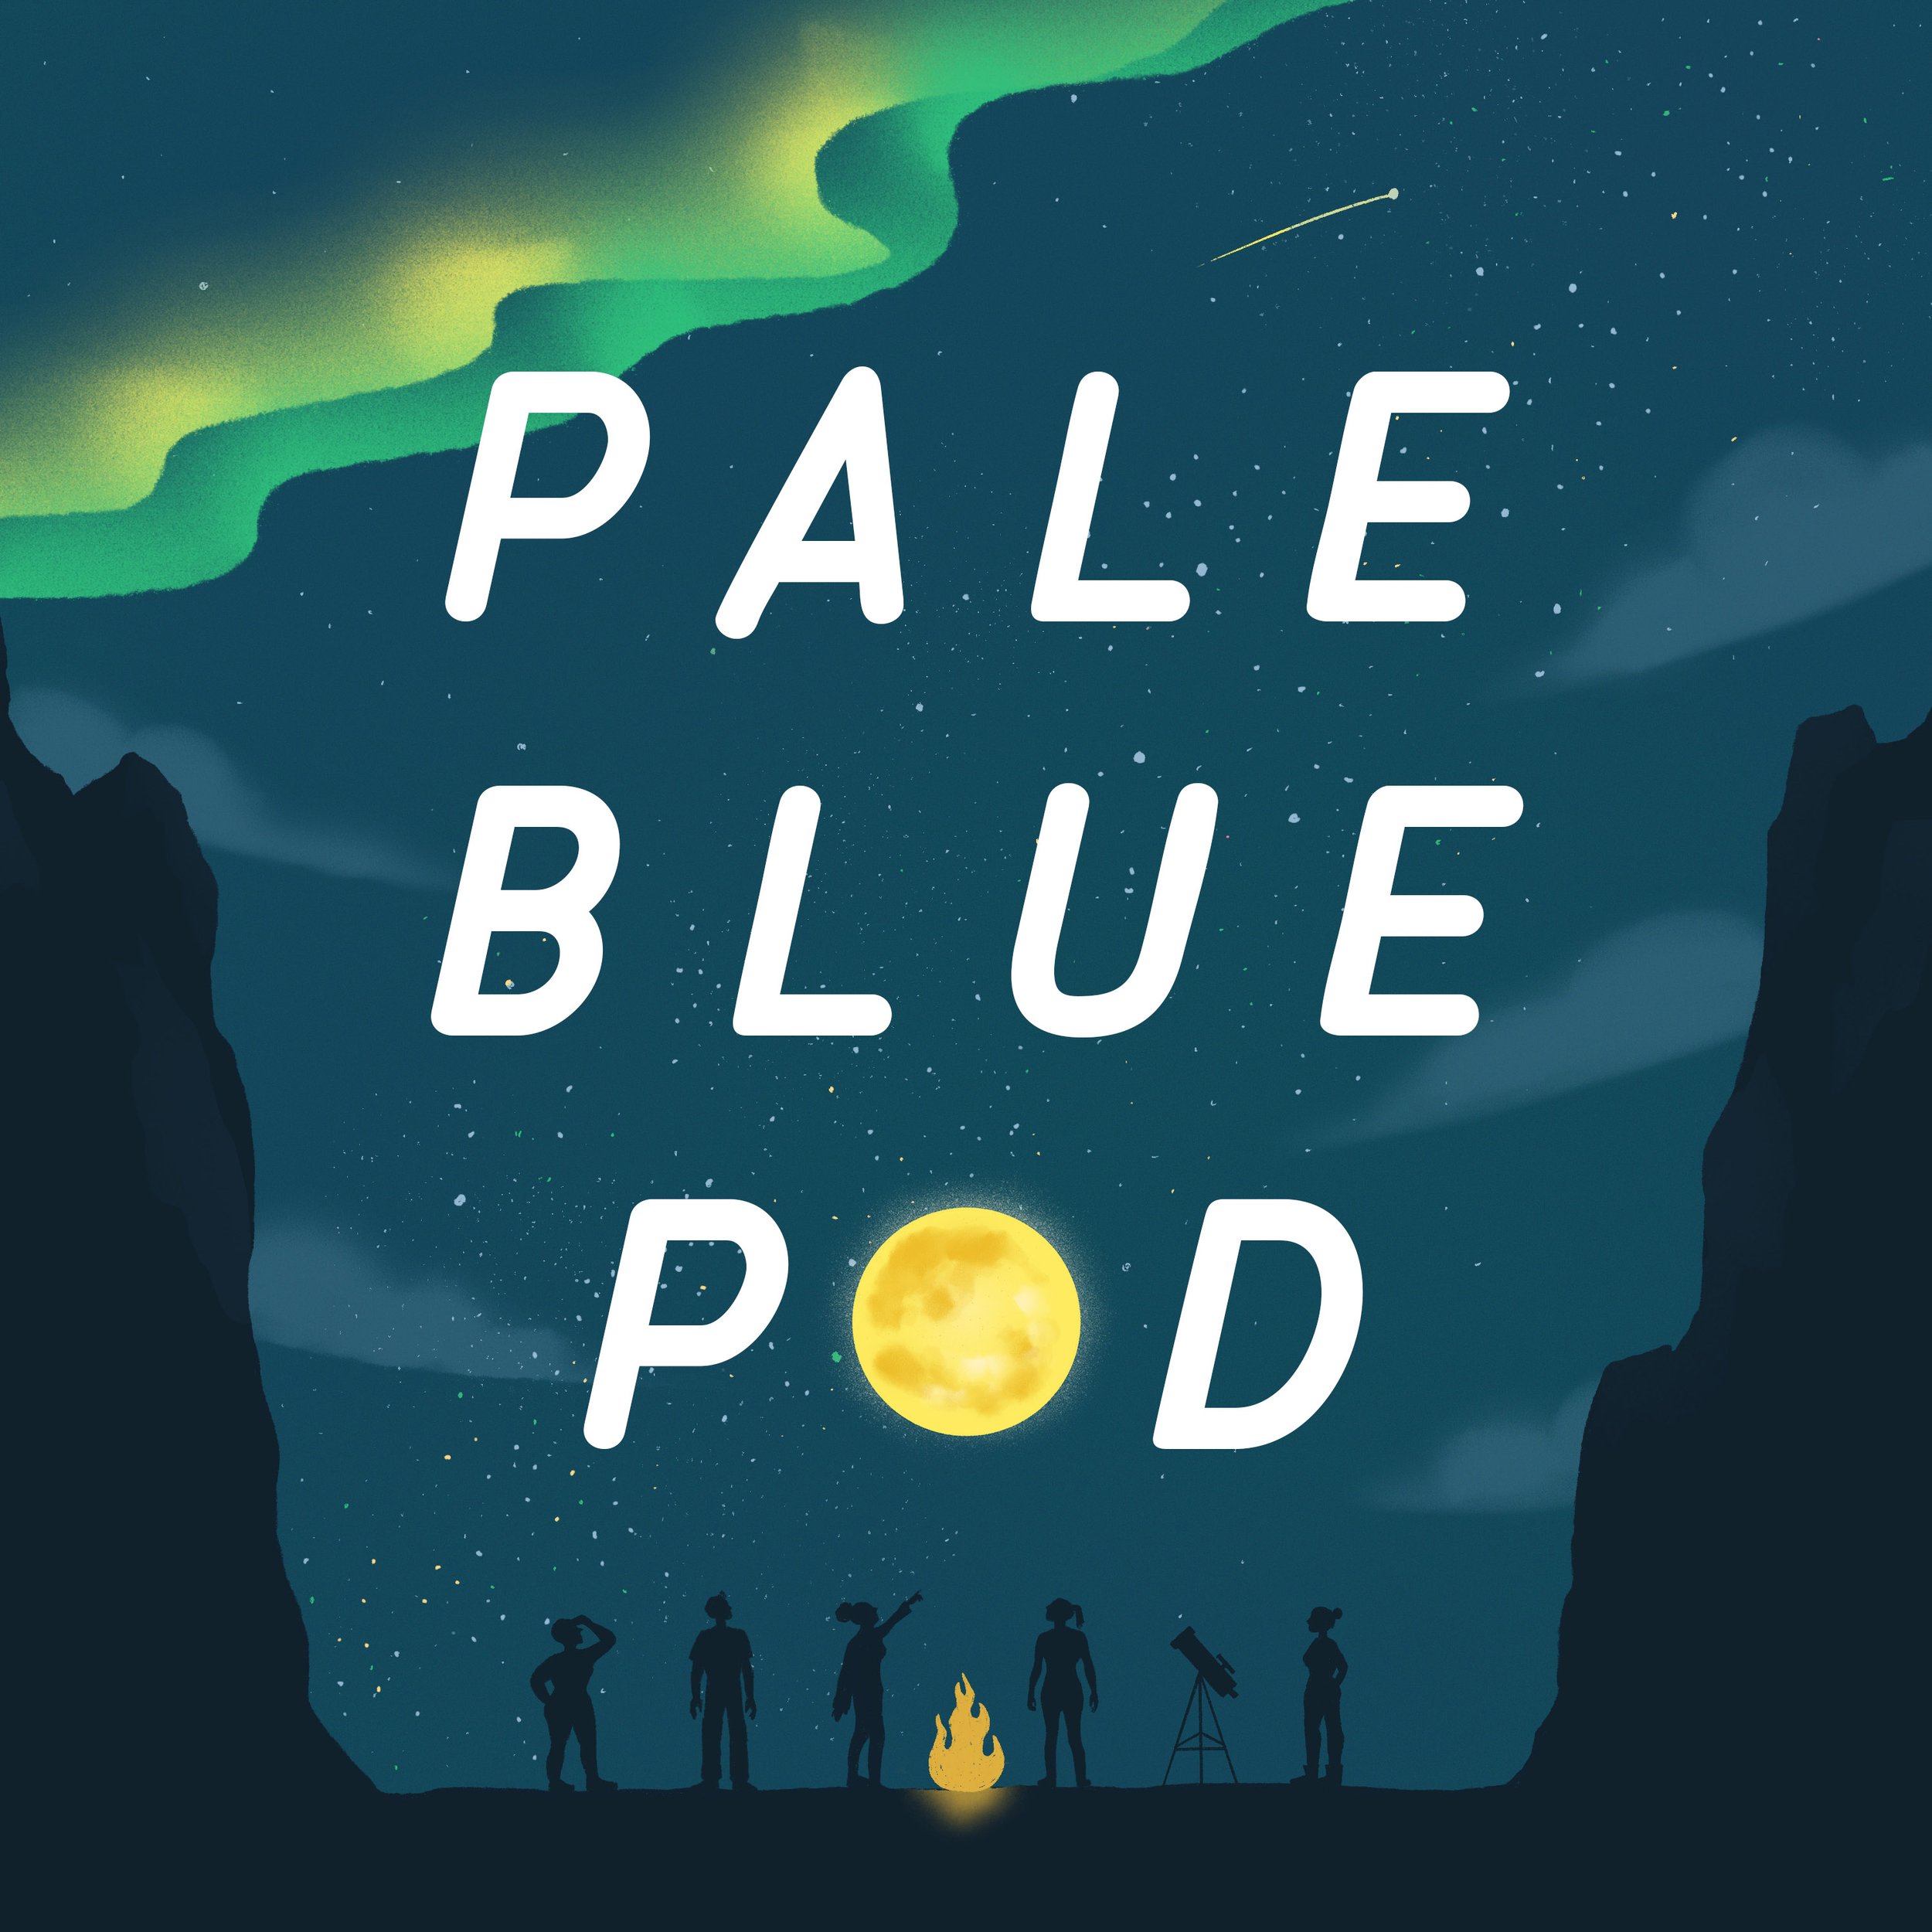 Live podcast recording of Pale Blue Pod-Eclipsing Stars Edition at FEED